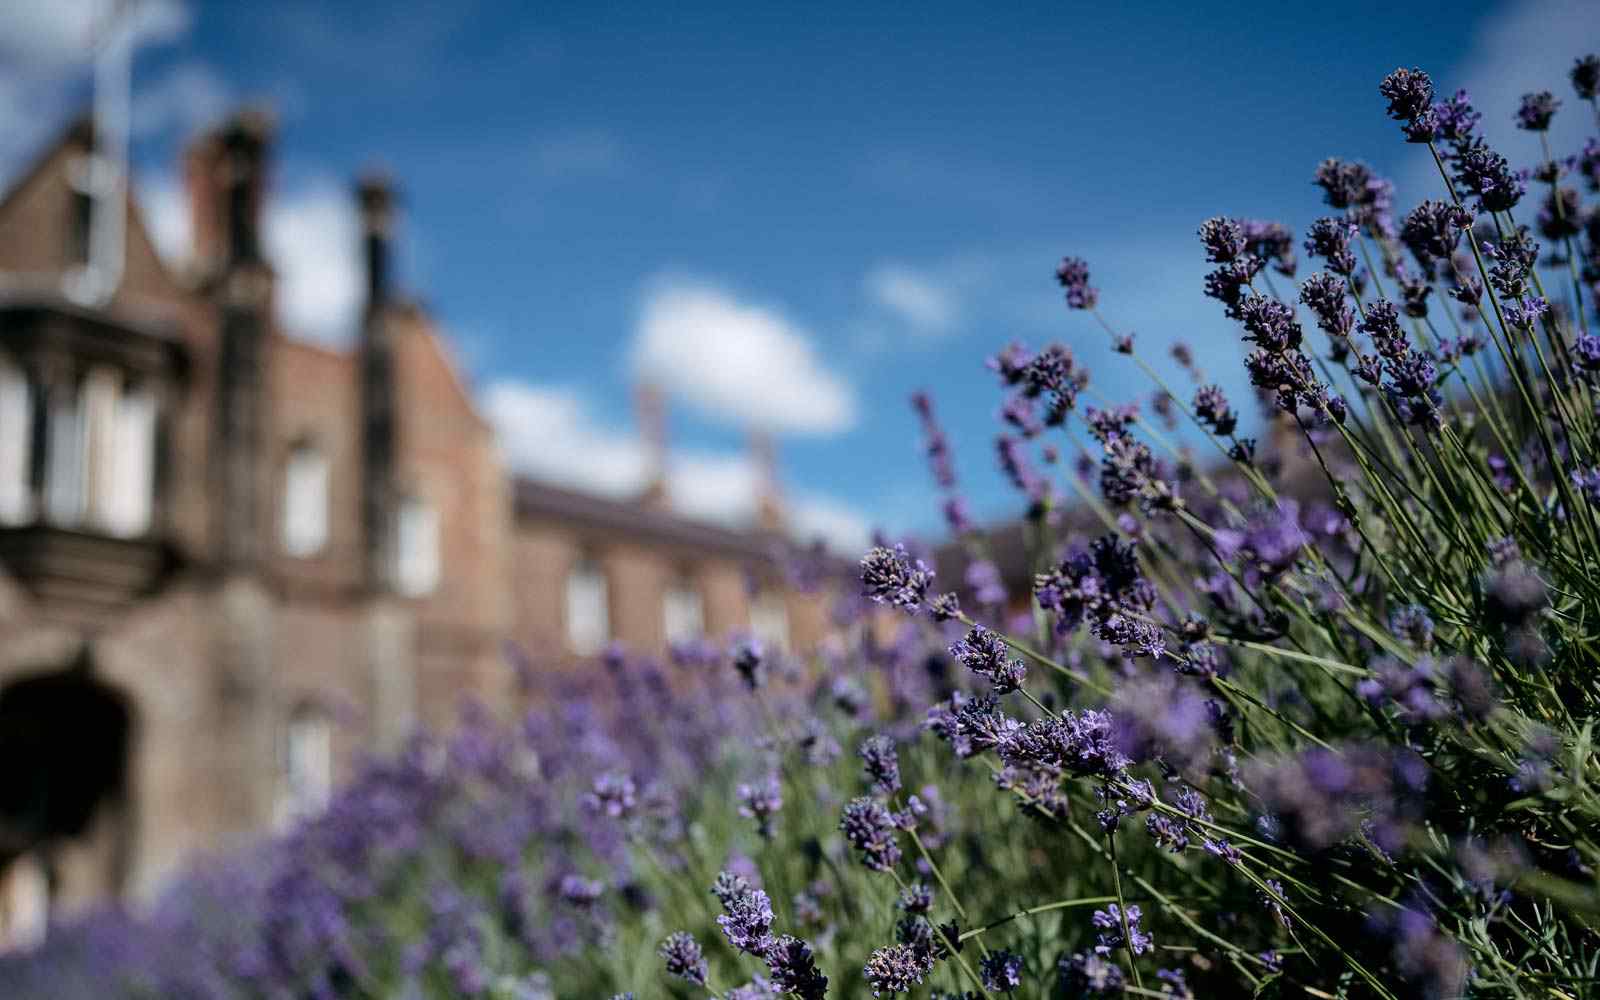 Bank of lavender in flower in front of campus building on Lord Mayors Walk 